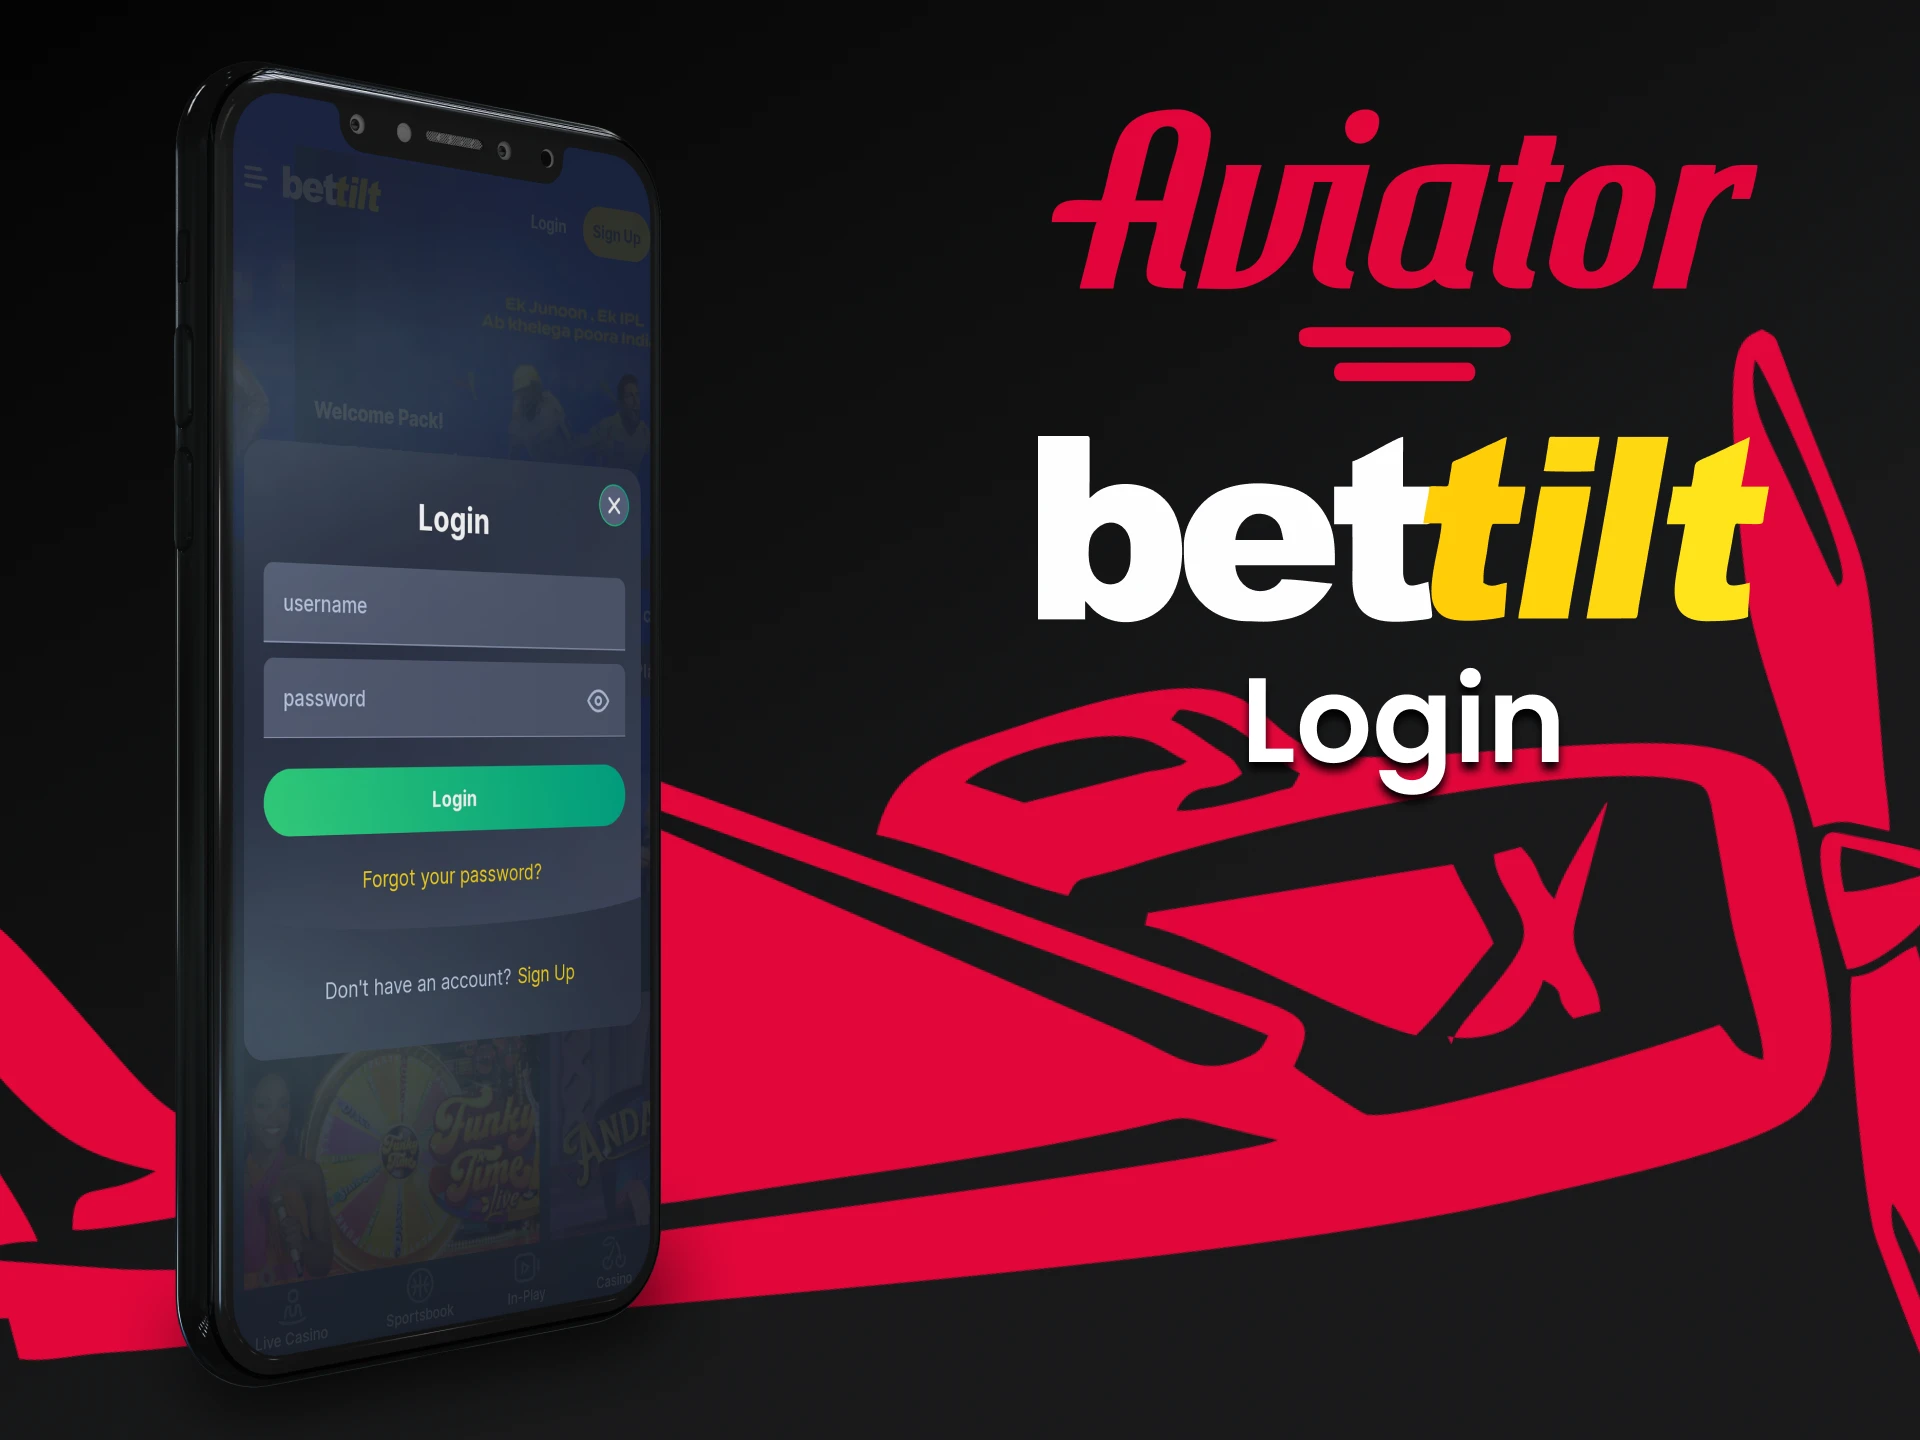 You can log into your personal account in the Bettilt app to play Aviator.